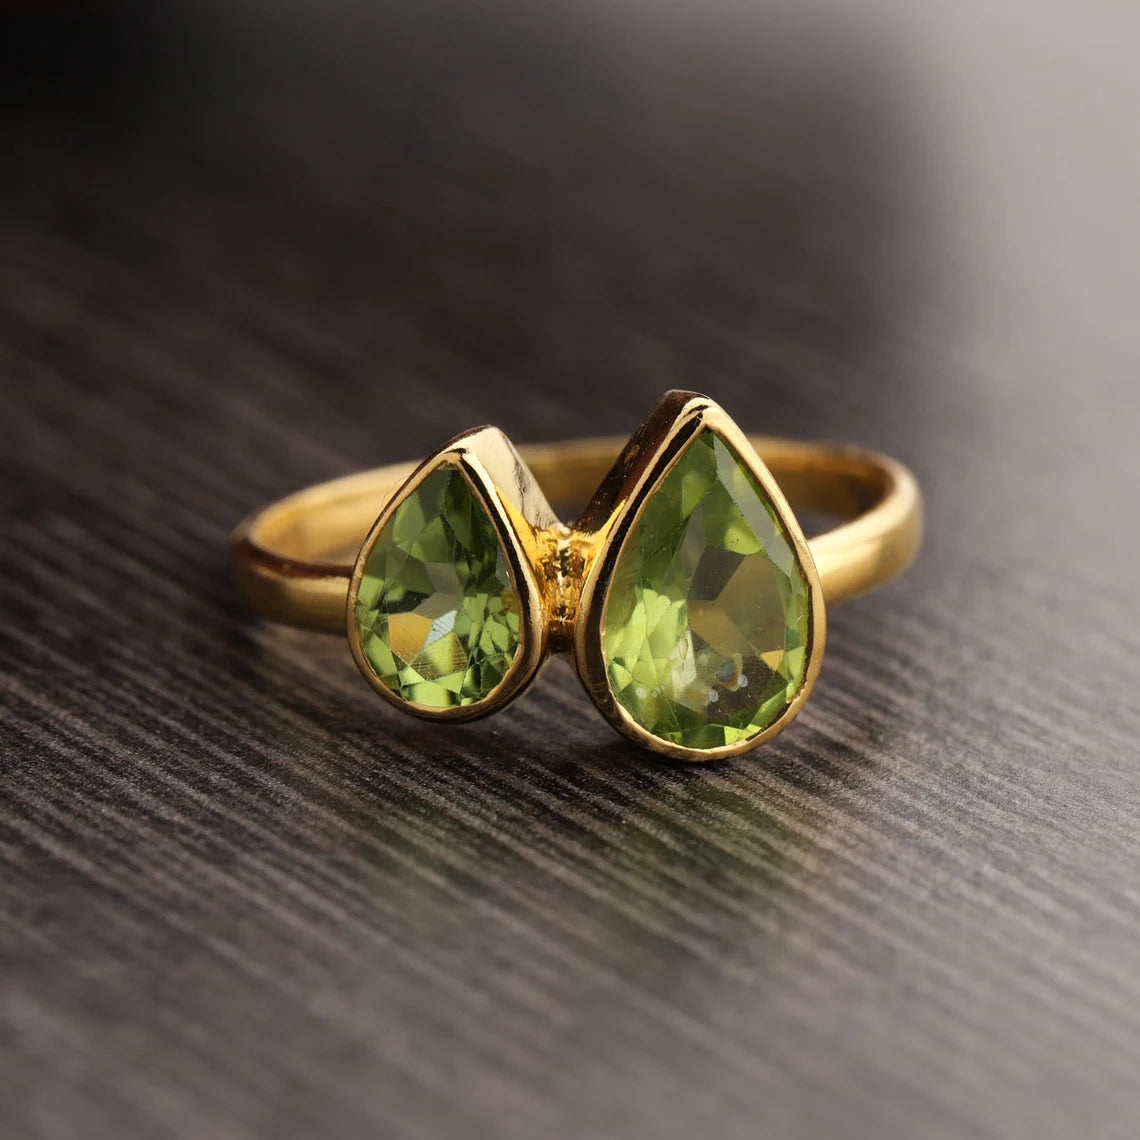 Natural Green Peridot Ring - Gold Ring - Handmade Pear Cut Ring - 925 Sterling Silver Ring - - Birthstone Ring - Size US 6 to 10